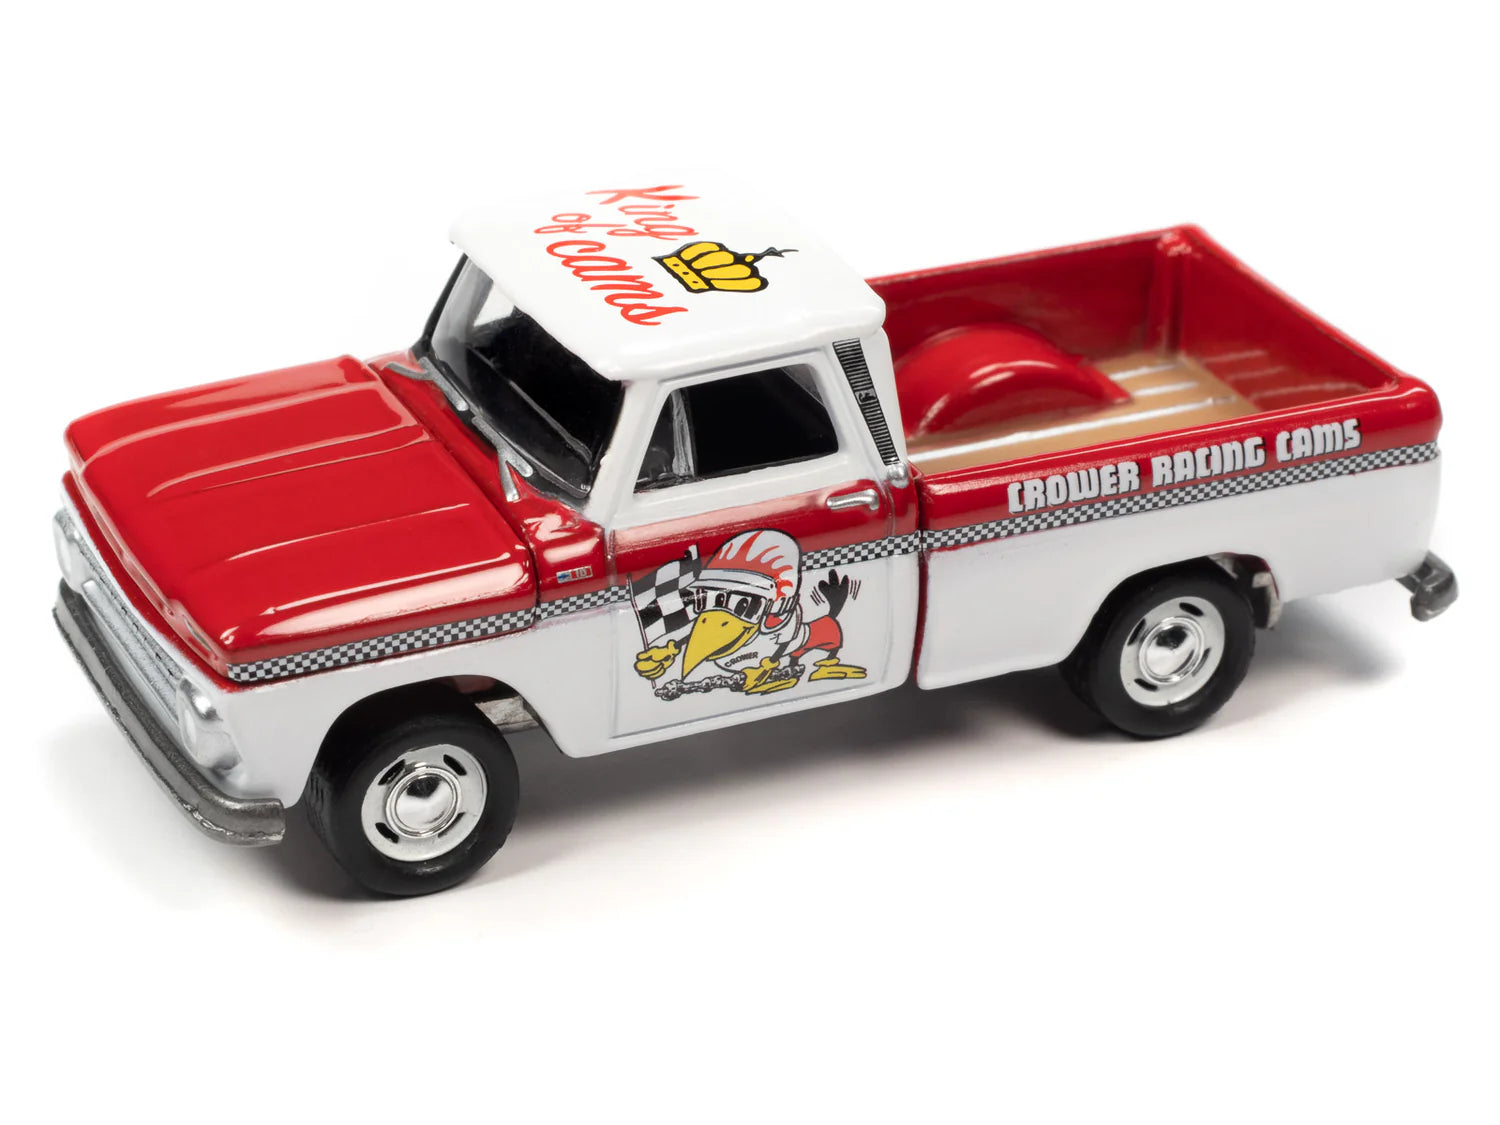 1965 Chevy Truck (White &amp; Red w/ Crower Racing Cams Graphics)